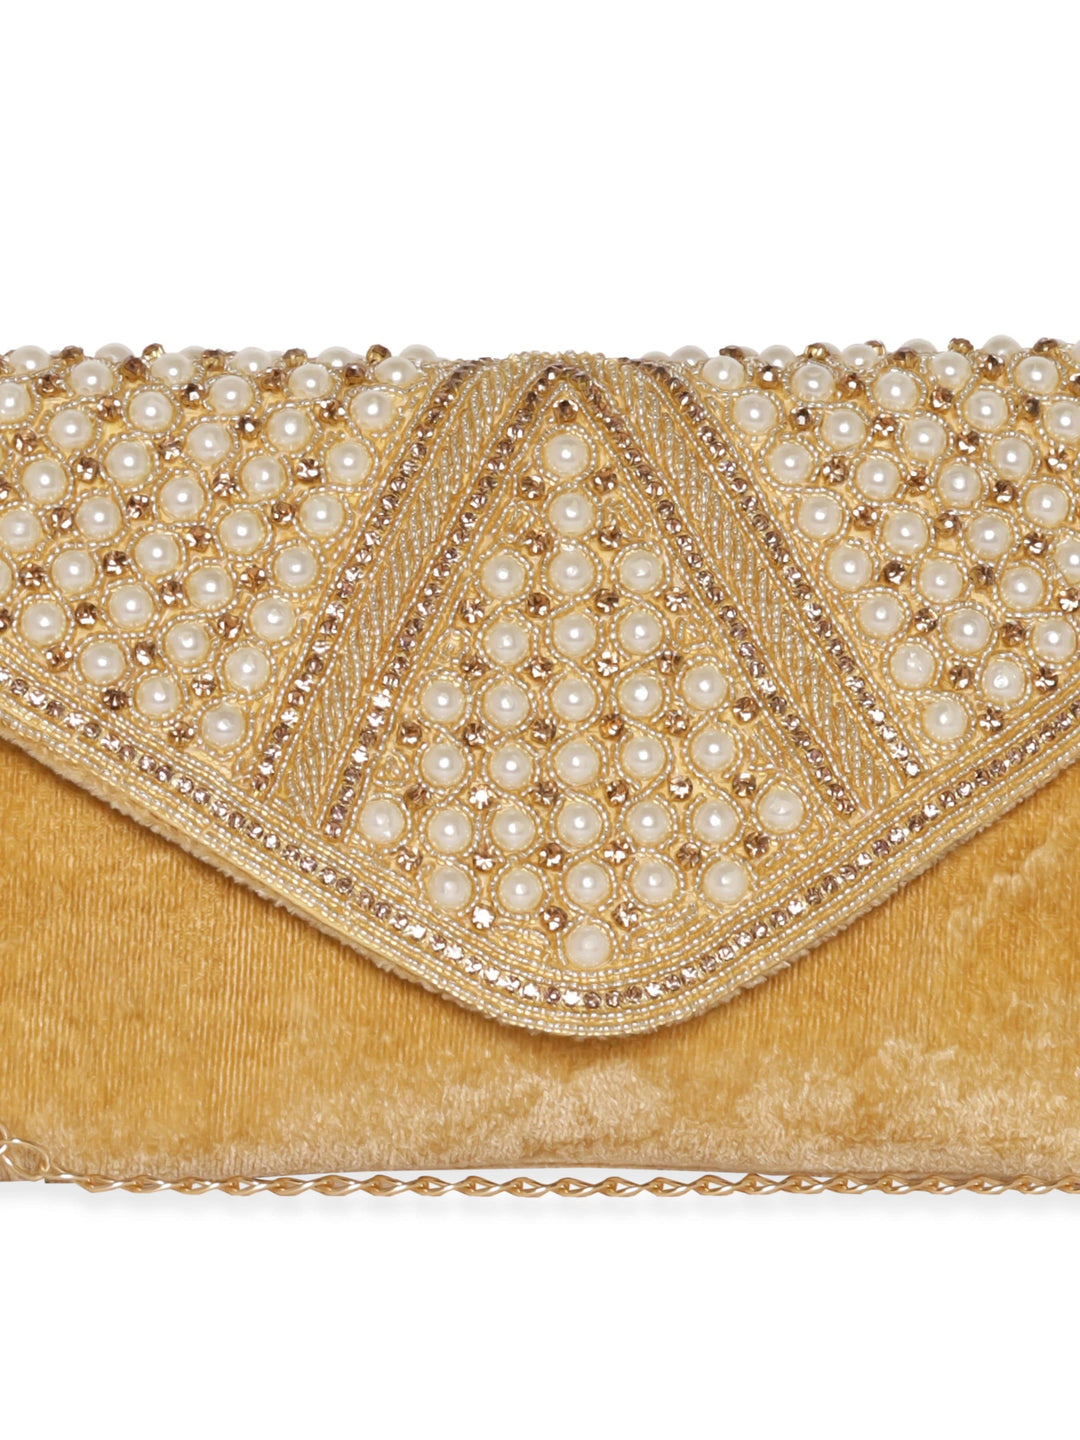 Rubans Beige Clutch with Stone and Pearl Embellishment Handbag, Wallet Accessories & Clutches